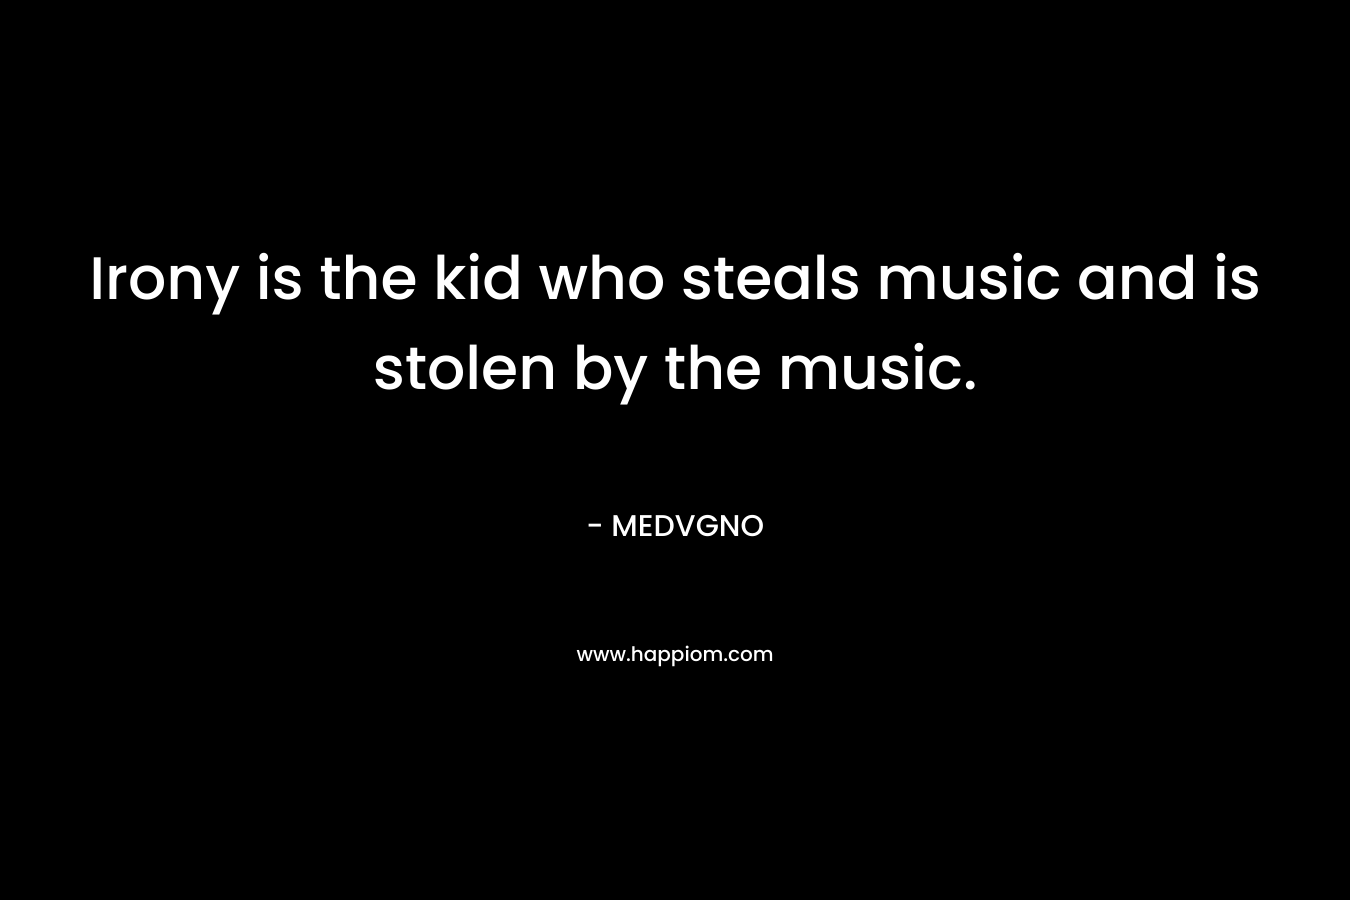 Irony is the kid who steals music and is stolen by the music.